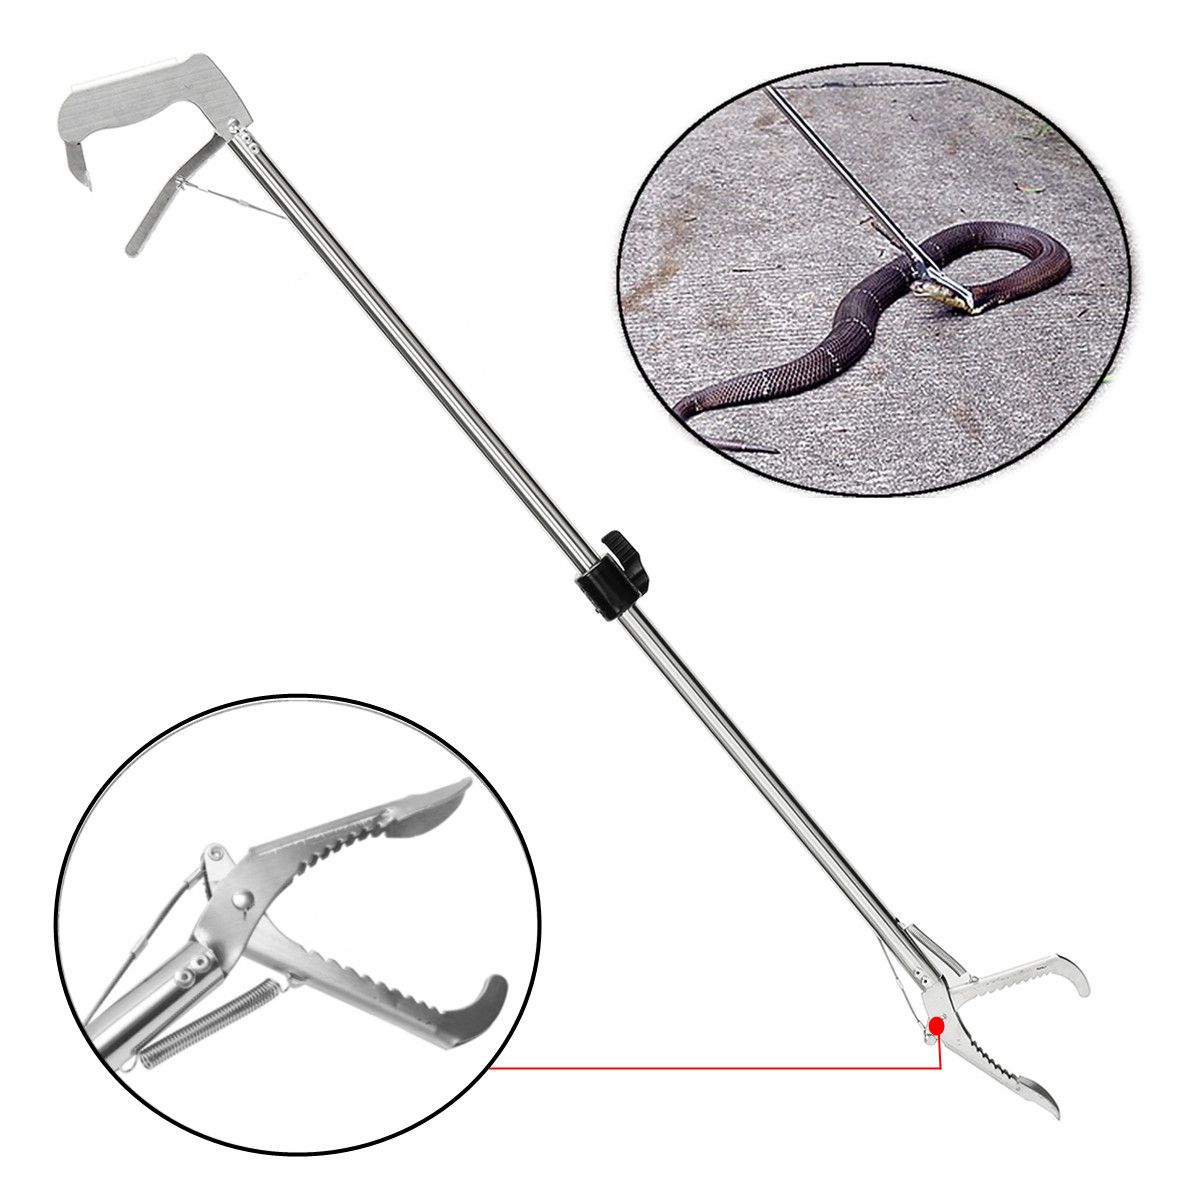 39-Inch-Snake-Tongs-Automatic-Lock-Foldable-Snake-Catcher-Pliers-Reptile-Grabber-Handling-Tool-1182384